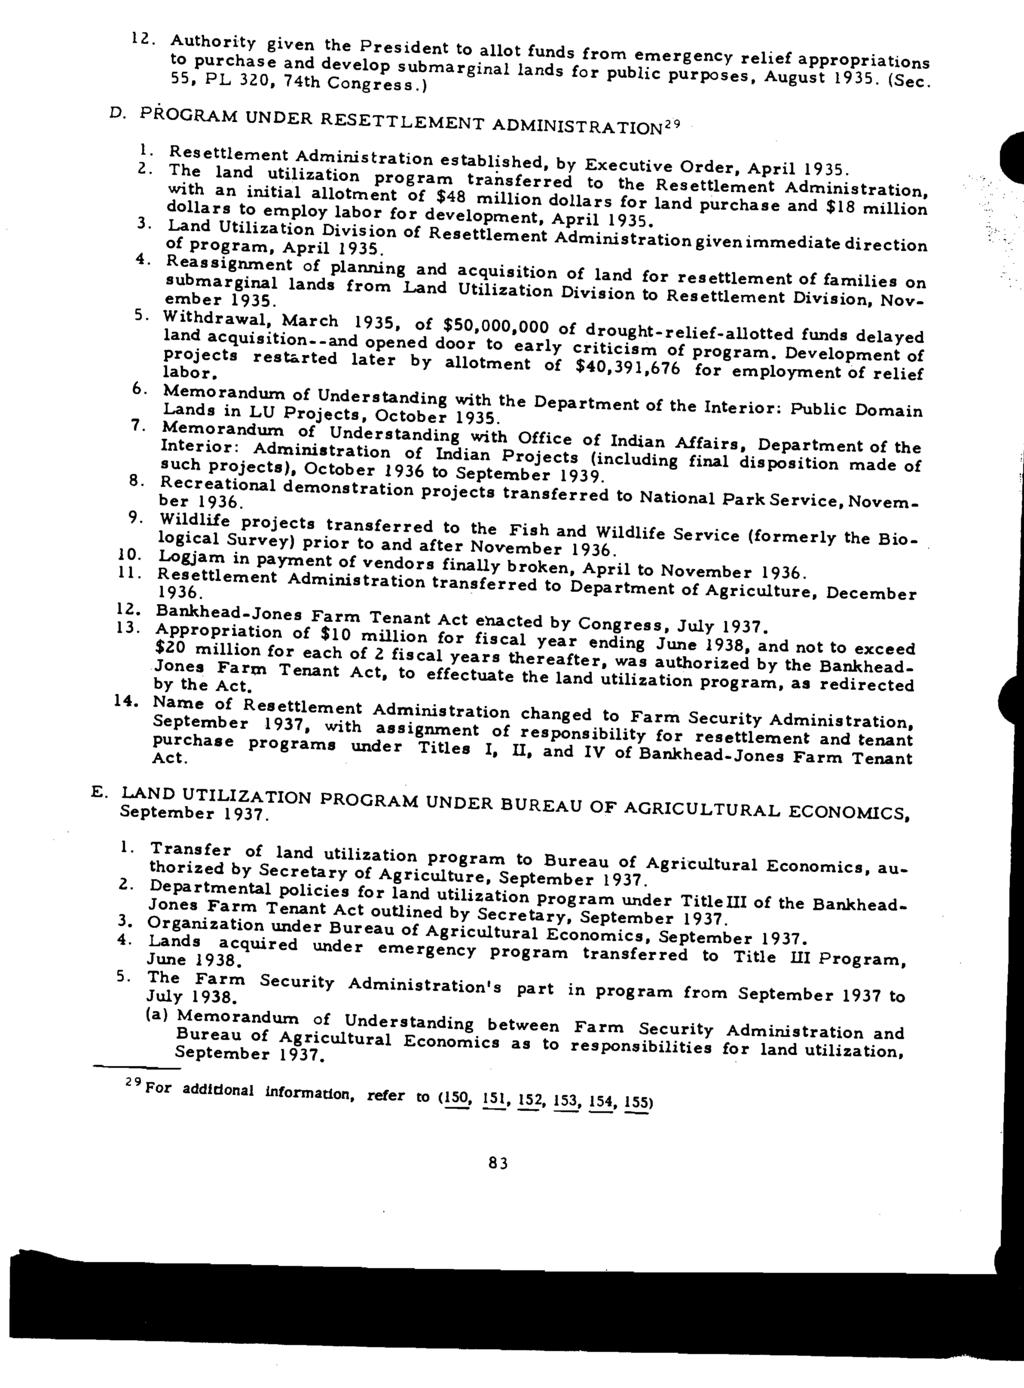 12. Authority given the President to allot funds from emergency relief appropriations to purchase and develop submarginal lands for public purposes, August 1935. (Sec. 55, PL 320, 74th Congress.) D.